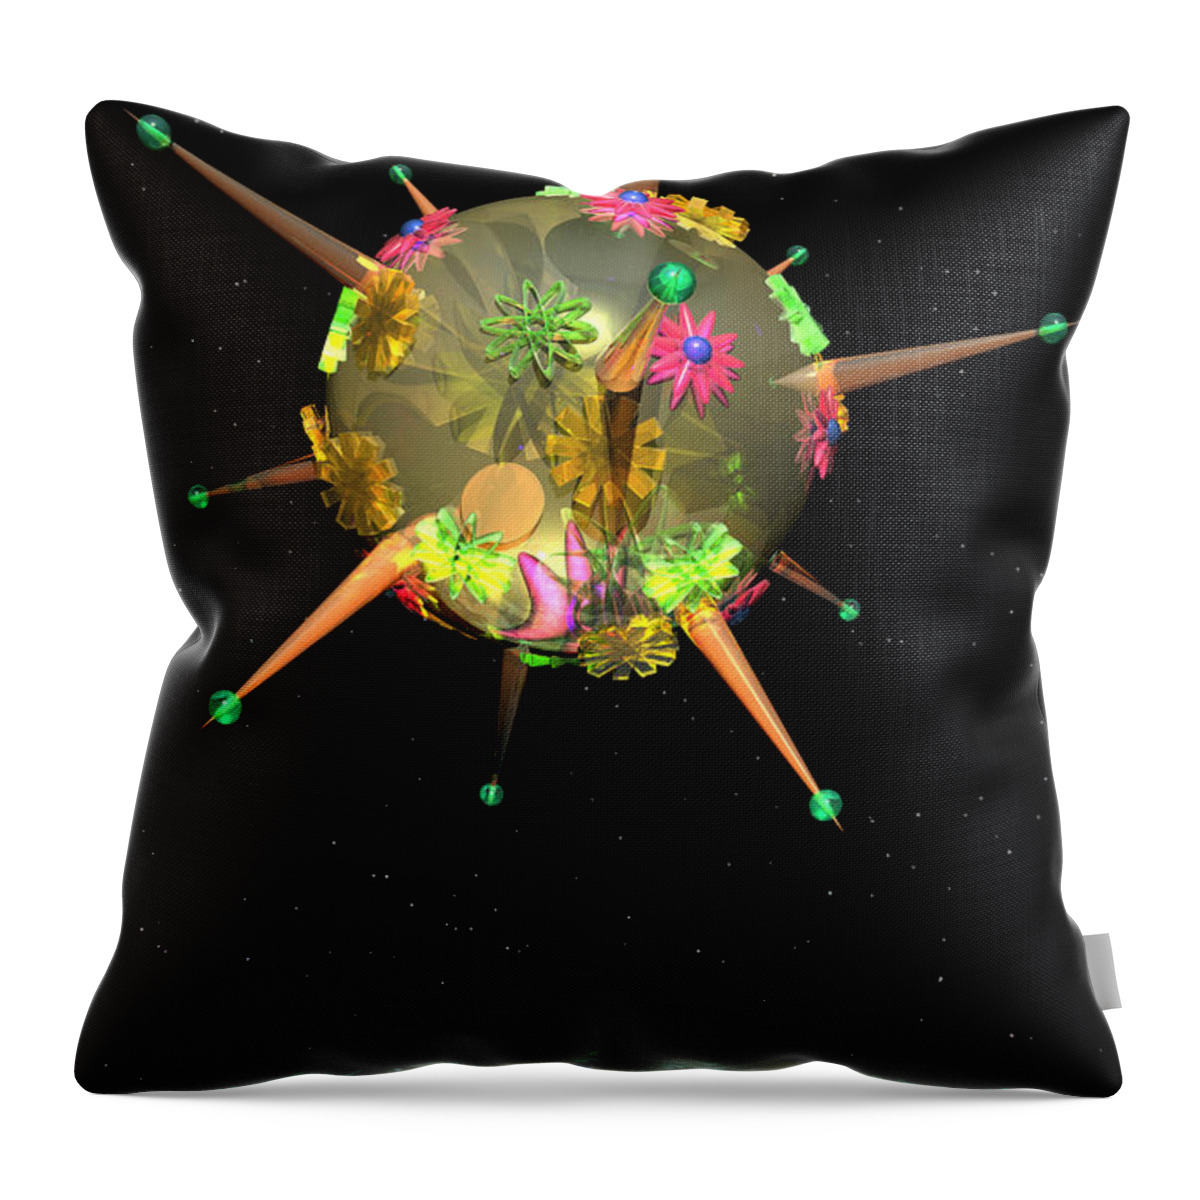 3d Art: 3d Art; Abstract: Color; Abstract: Geometric; Science Fiction & Fantasy: Space Throw Pillow featuring the digital art Momentary Sputnik 11 by Ann Stretton